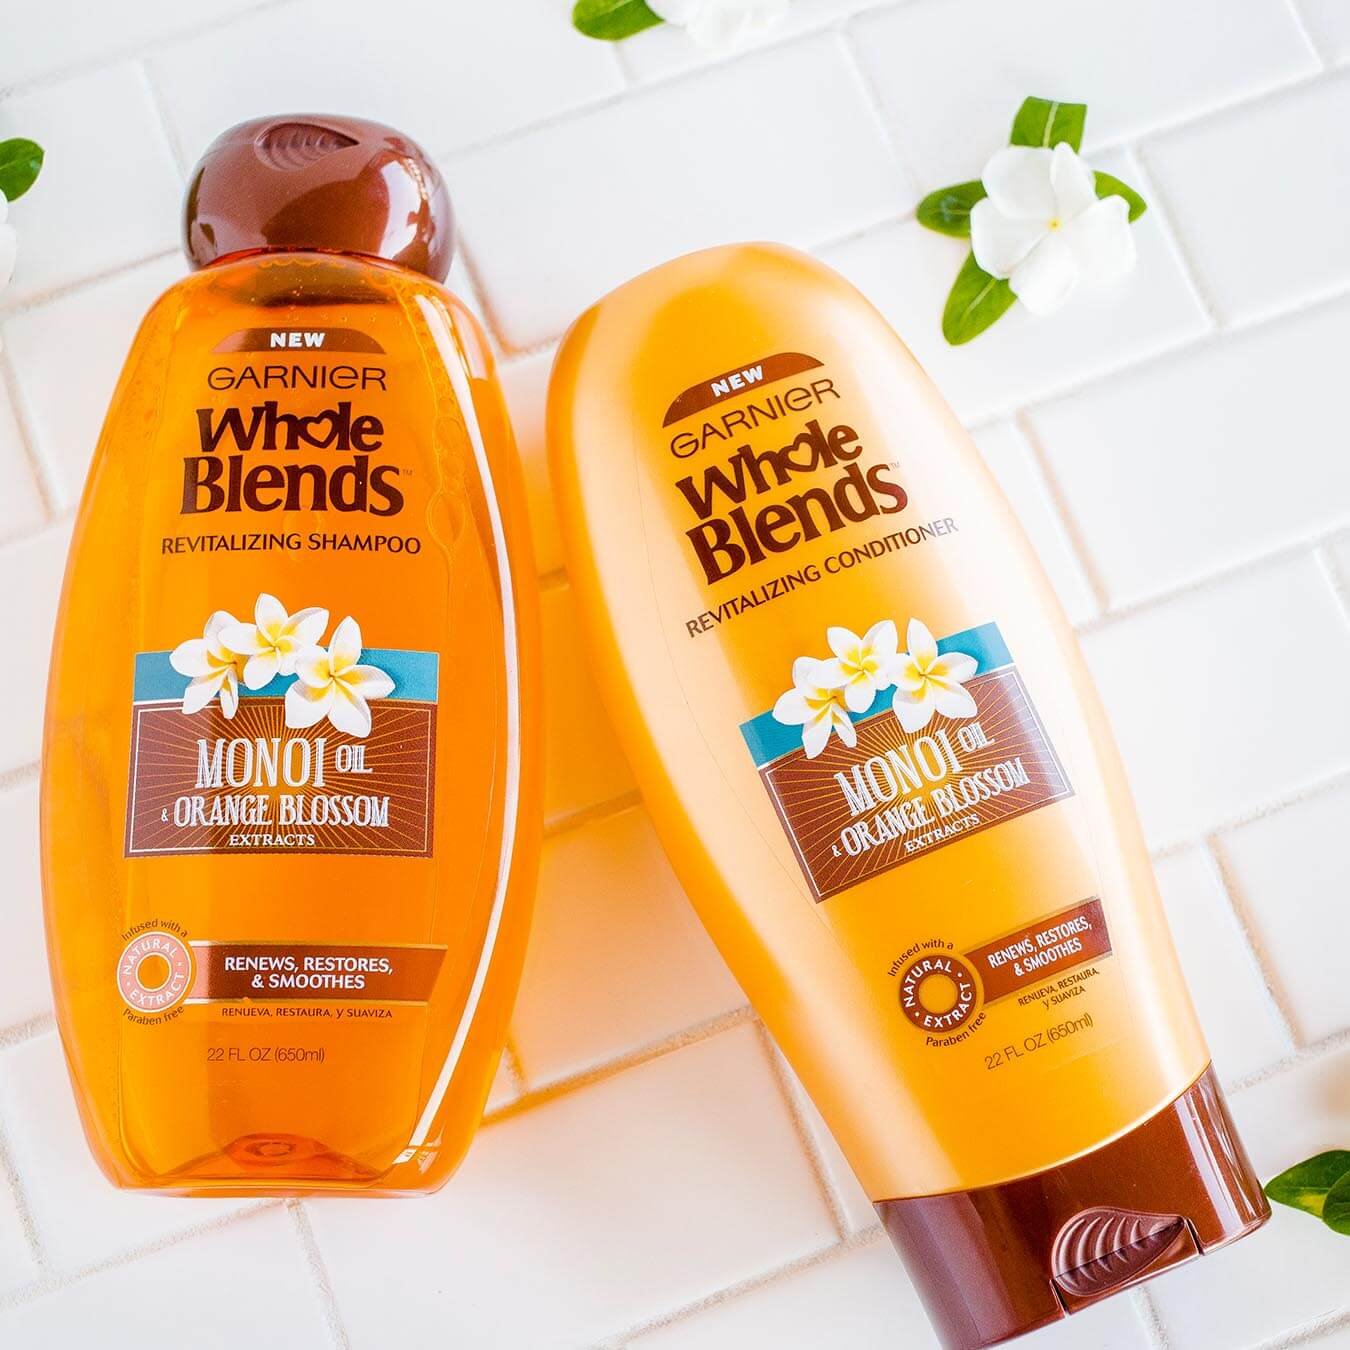 Whole Blends Monoi Oil Shampoo with Orange Blossom Extract and Monoi Oil Conditioner with Orange Blossom Extract on white tiles strewn with monoi blossoms.